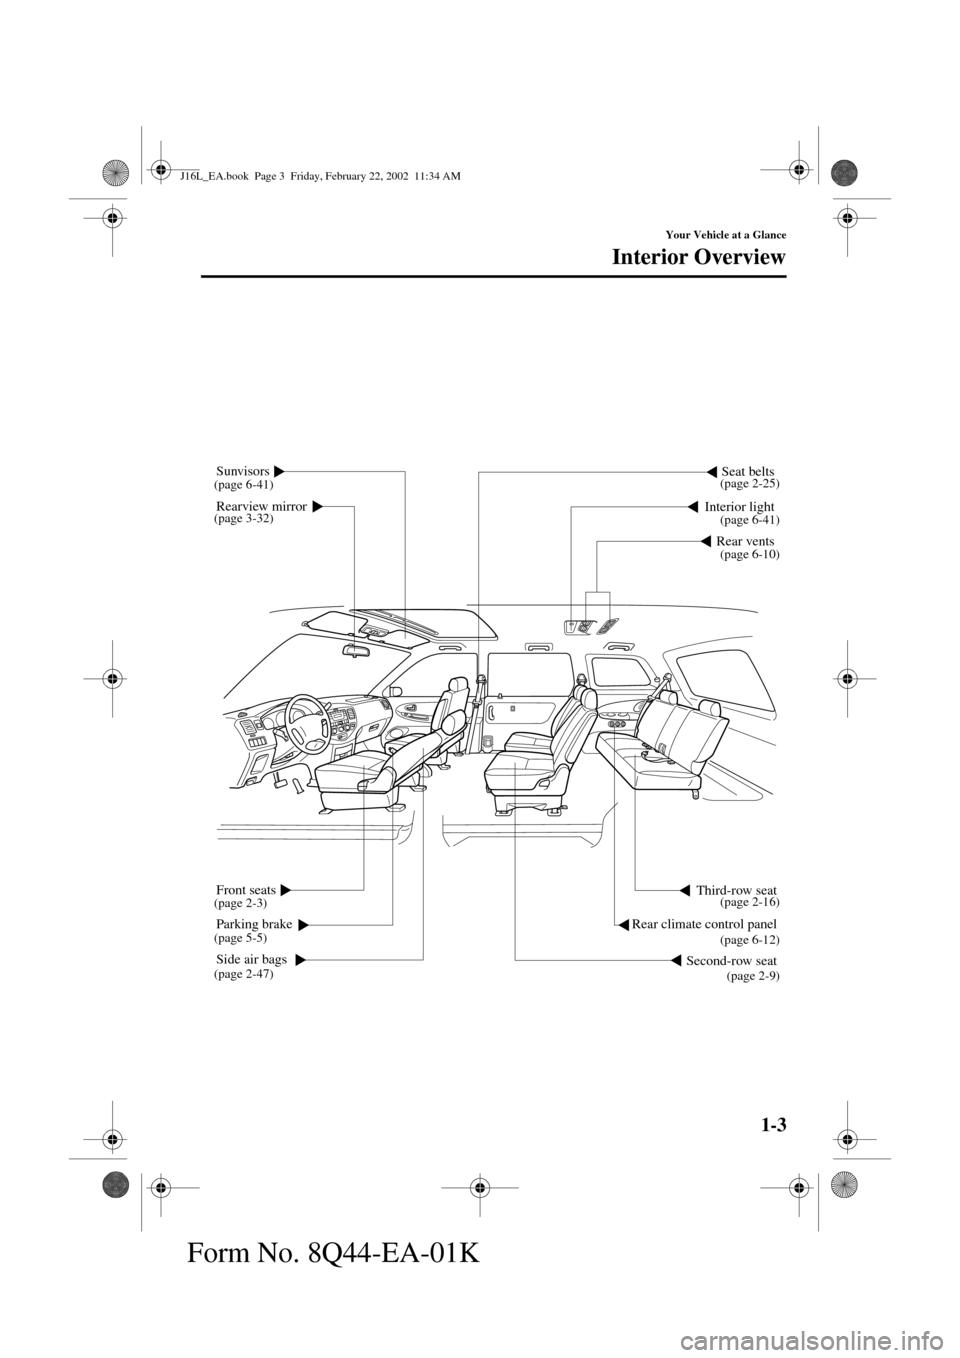 MAZDA MODEL MPV 2002  Owners Manual (in English) 1-3
Your Vehicle at a Glance
Form No. 8Q44-EA-01K
Interior Overview
Rearview mirrorSeat beltsInterior light
Sunvisors
Front seats
Side air bagsSecond-row seat
Third-row seat
Parking brakeRear climate 